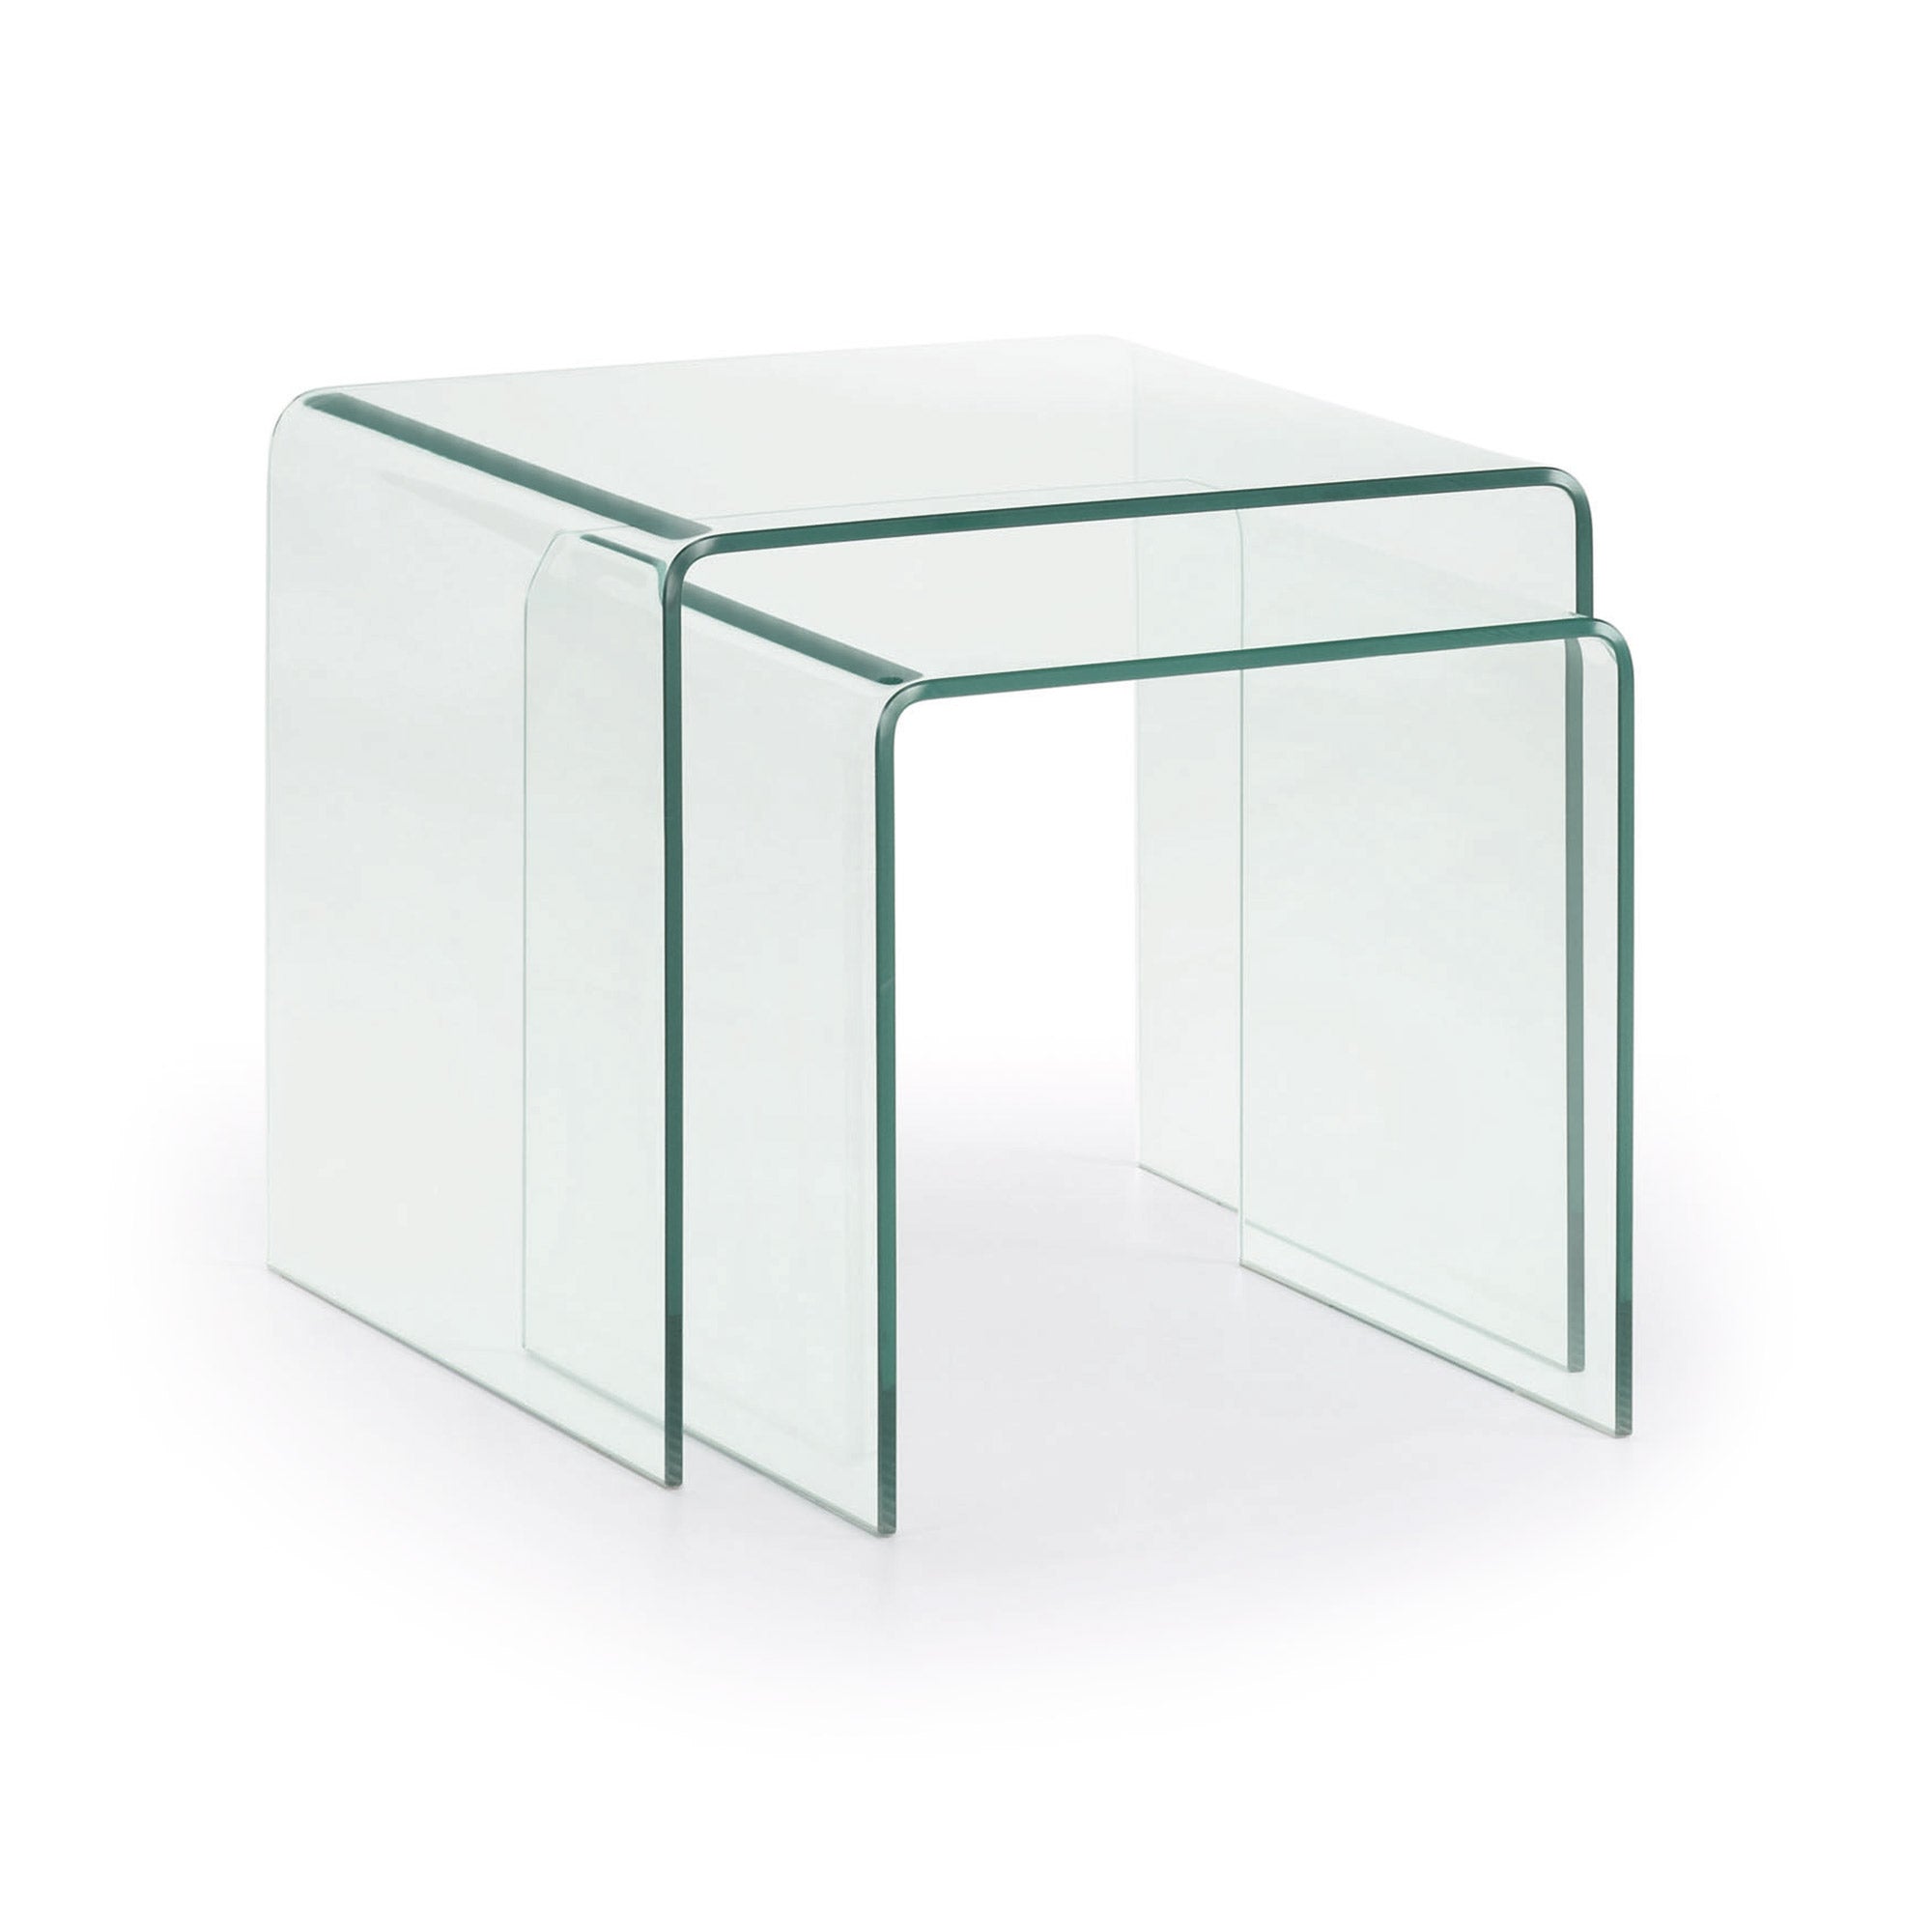 Burano nest of 2 glass tables